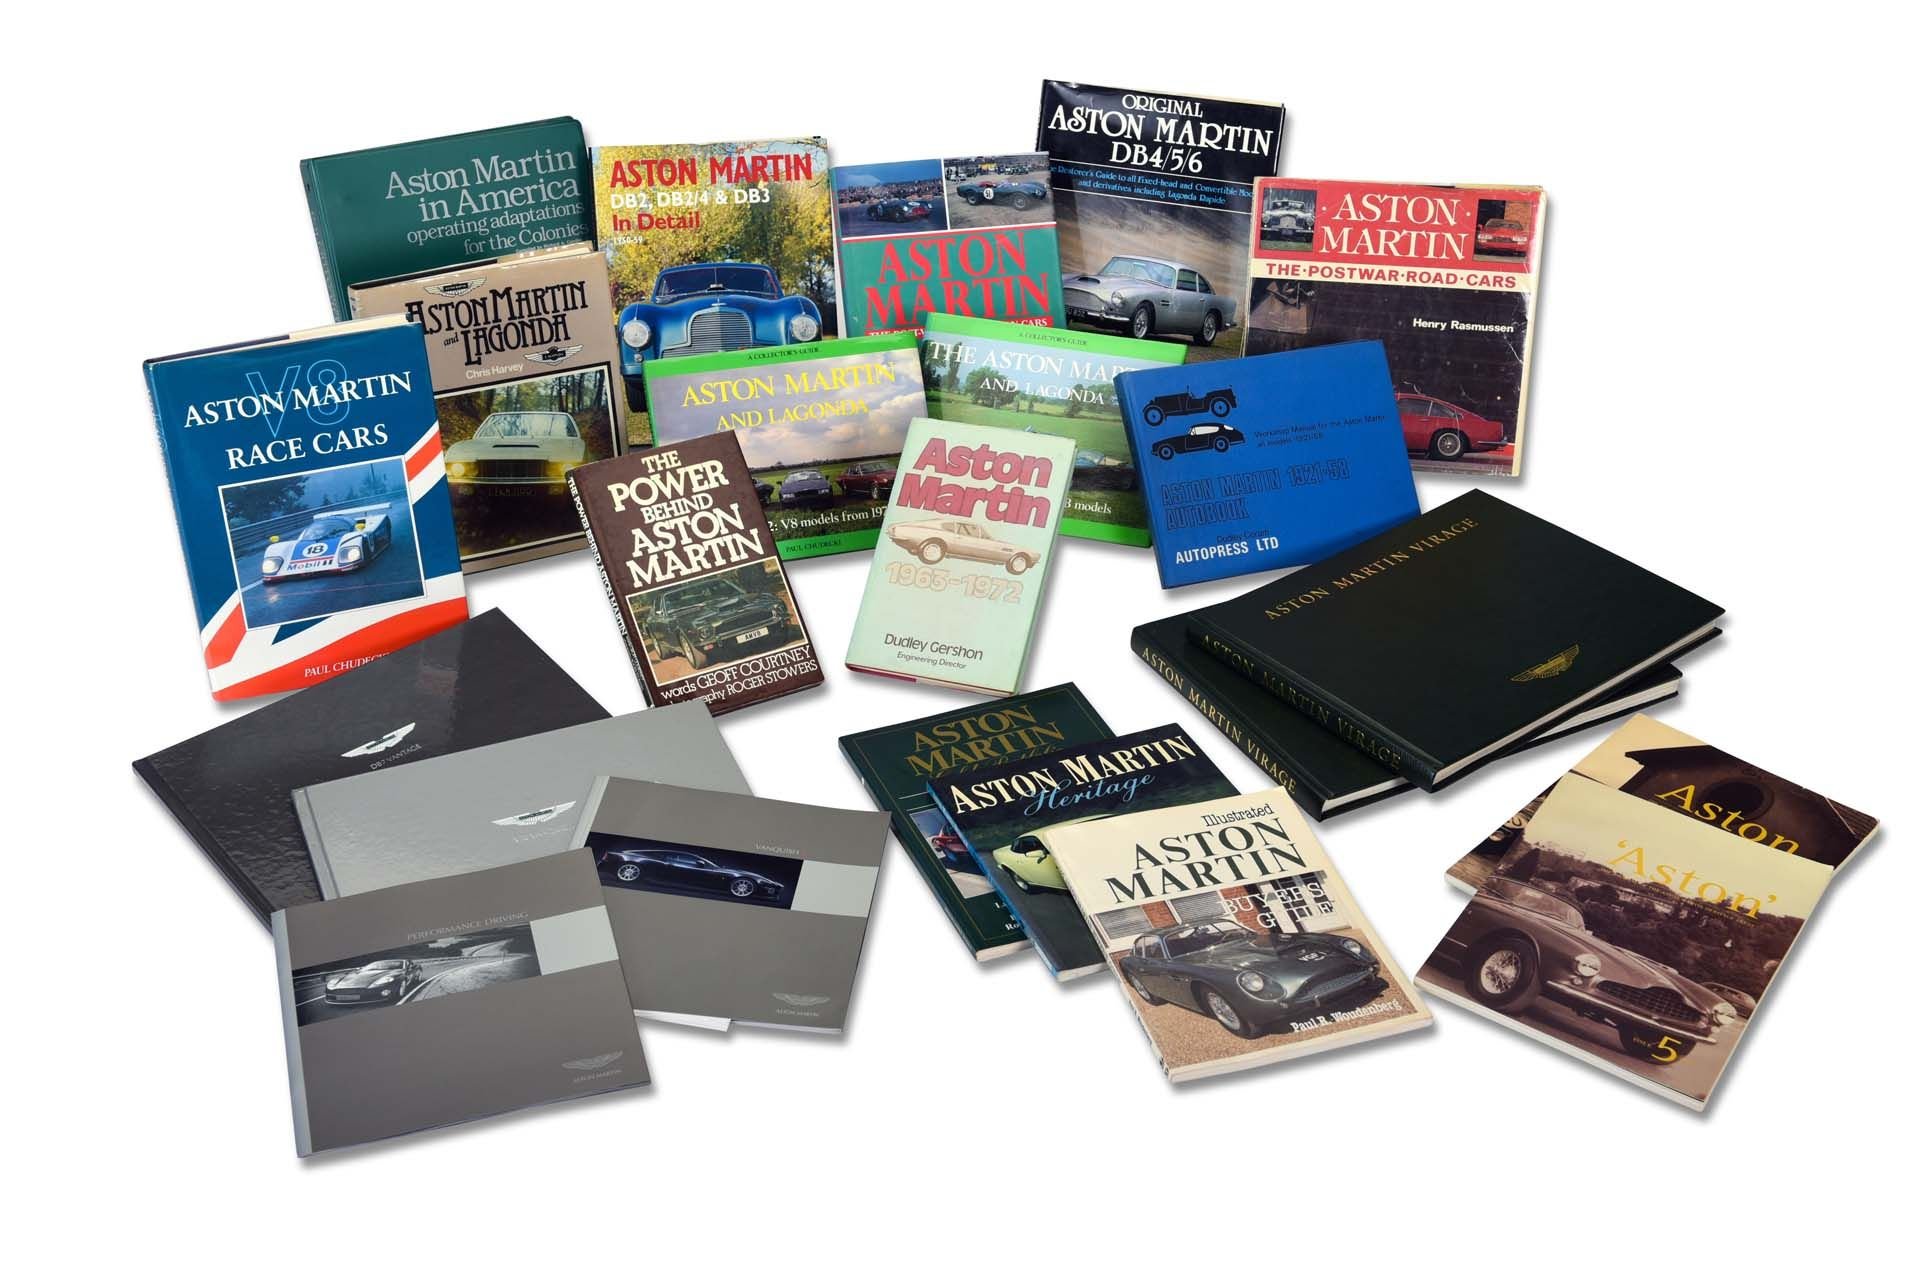 For Sale Group Lot of Aston Martin Books